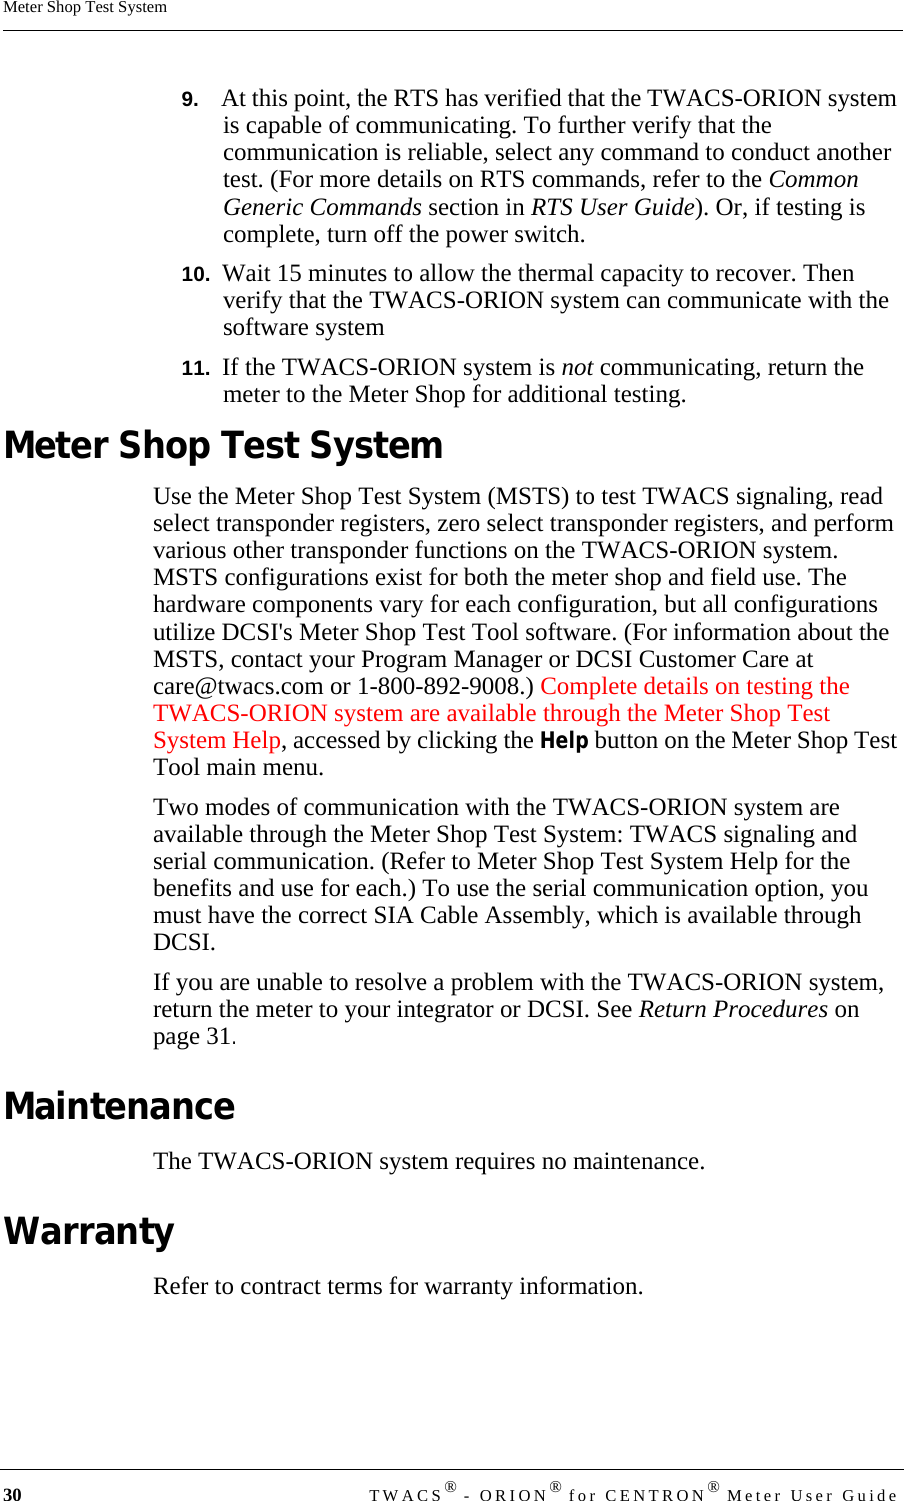 30 TWACS® - ORION® for CENTRON® Meter User GuideMeter Shop Test System9.   At this point, the RTS has verified that the TWACS-ORION system is capable of communicating. To further verify that the communication is reliable, select any command to conduct another test. (For more details on RTS commands, refer to the Common Generic Commands section in RTS User Guide). Or, if testing is complete, turn off the power switch.10.  Wait 15 minutes to allow the thermal capacity to recover. Then verify that the TWACS-ORION system can communicate with the software system11.  If the TWACS-ORION system is not communicating, return the meter to the Meter Shop for additional testing.Meter Shop Test SystemUse the Meter Shop Test System (MSTS) to test TWACS signaling, read select transponder registers, zero select transponder registers, and perform various other transponder functions on the TWACS-ORION system. MSTS configurations exist for both the meter shop and field use. The hardware components vary for each configuration, but all configurations utilize DCSI&apos;s Meter Shop Test Tool software. (For information about the MSTS, contact your Program Manager or DCSI Customer Care at care@twacs.com or 1-800-892-9008.) Complete details on testing the TWACS-ORION system are available through the Meter Shop Test System Help, accessed by clicking the Help button on the Meter Shop Test Tool main menu.Two modes of communication with the TWACS-ORION system are available through the Meter Shop Test System: TWACS signaling and serial communication. (Refer to Meter Shop Test System Help for the benefits and use for each.) To use the serial communication option, you must have the correct SIA Cable Assembly, which is available through DCSI. If you are unable to resolve a problem with the TWACS-ORION system, return the meter to your integrator or DCSI. See Return Procedures on page 31.MaintenanceThe TWACS-ORION system requires no maintenance.WarrantyRefer to contract terms for warranty information.